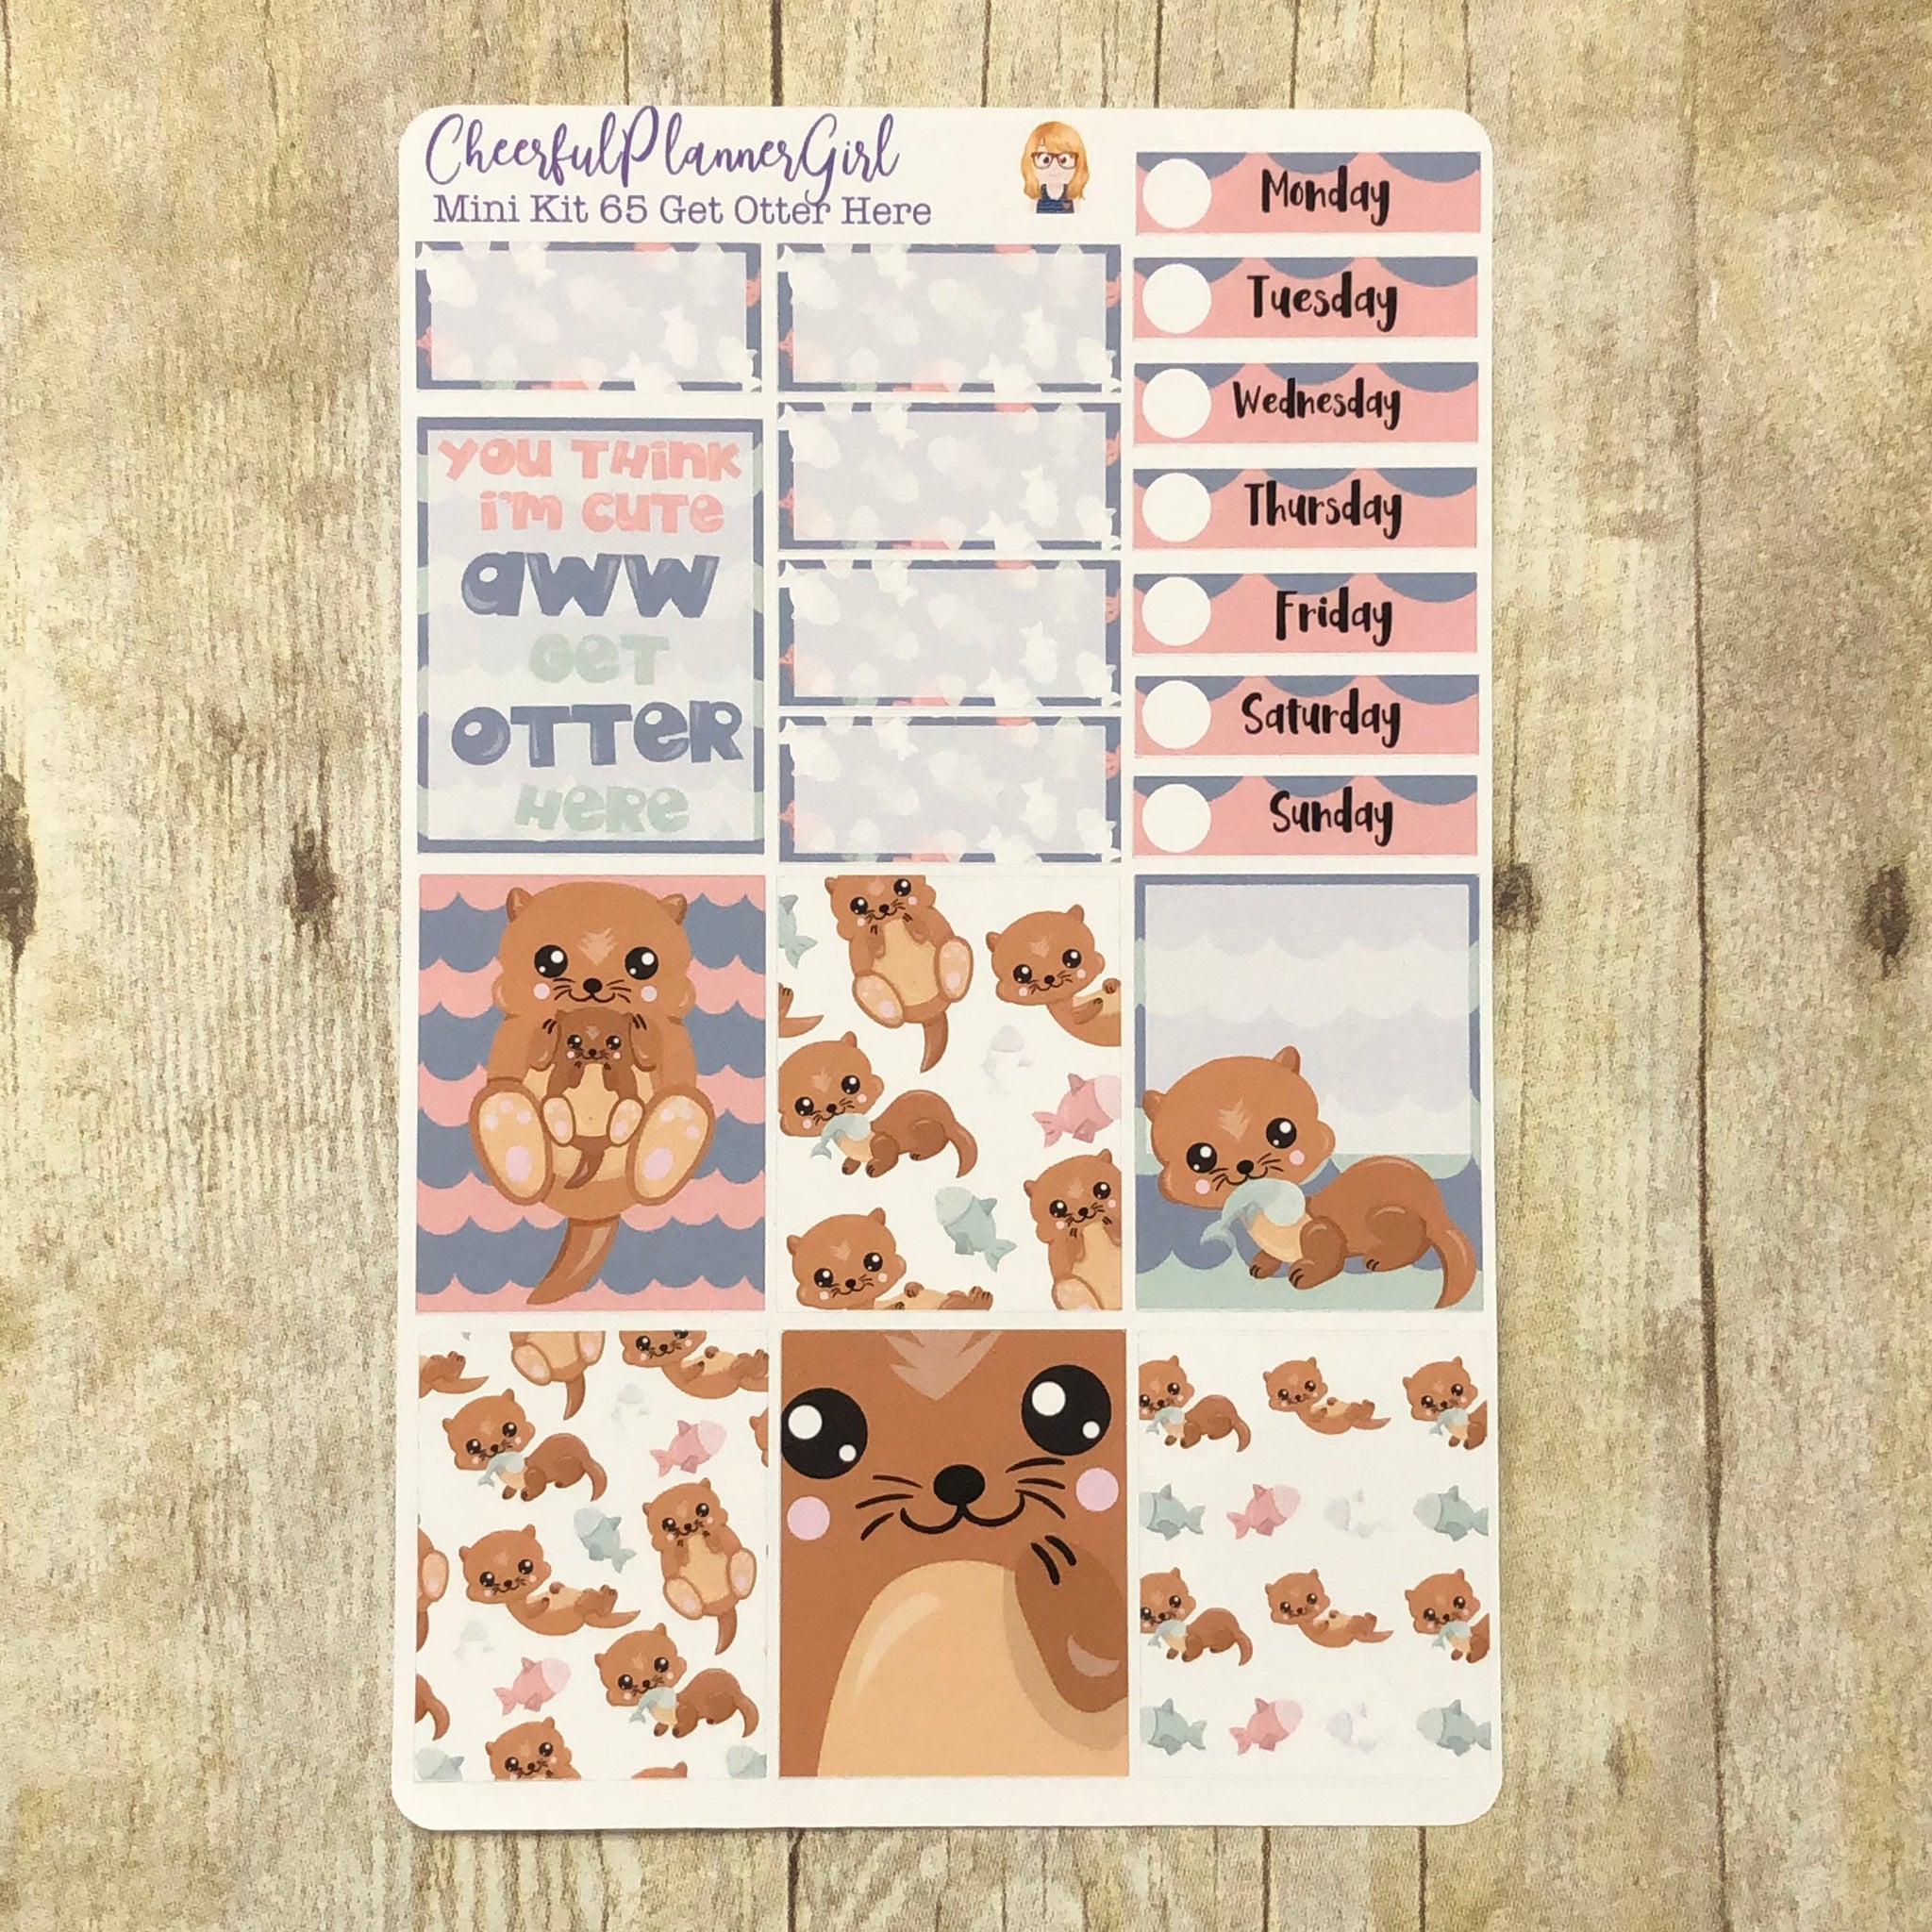 Get Otter Here Mini Kit Weekly Layout Planner Stickers